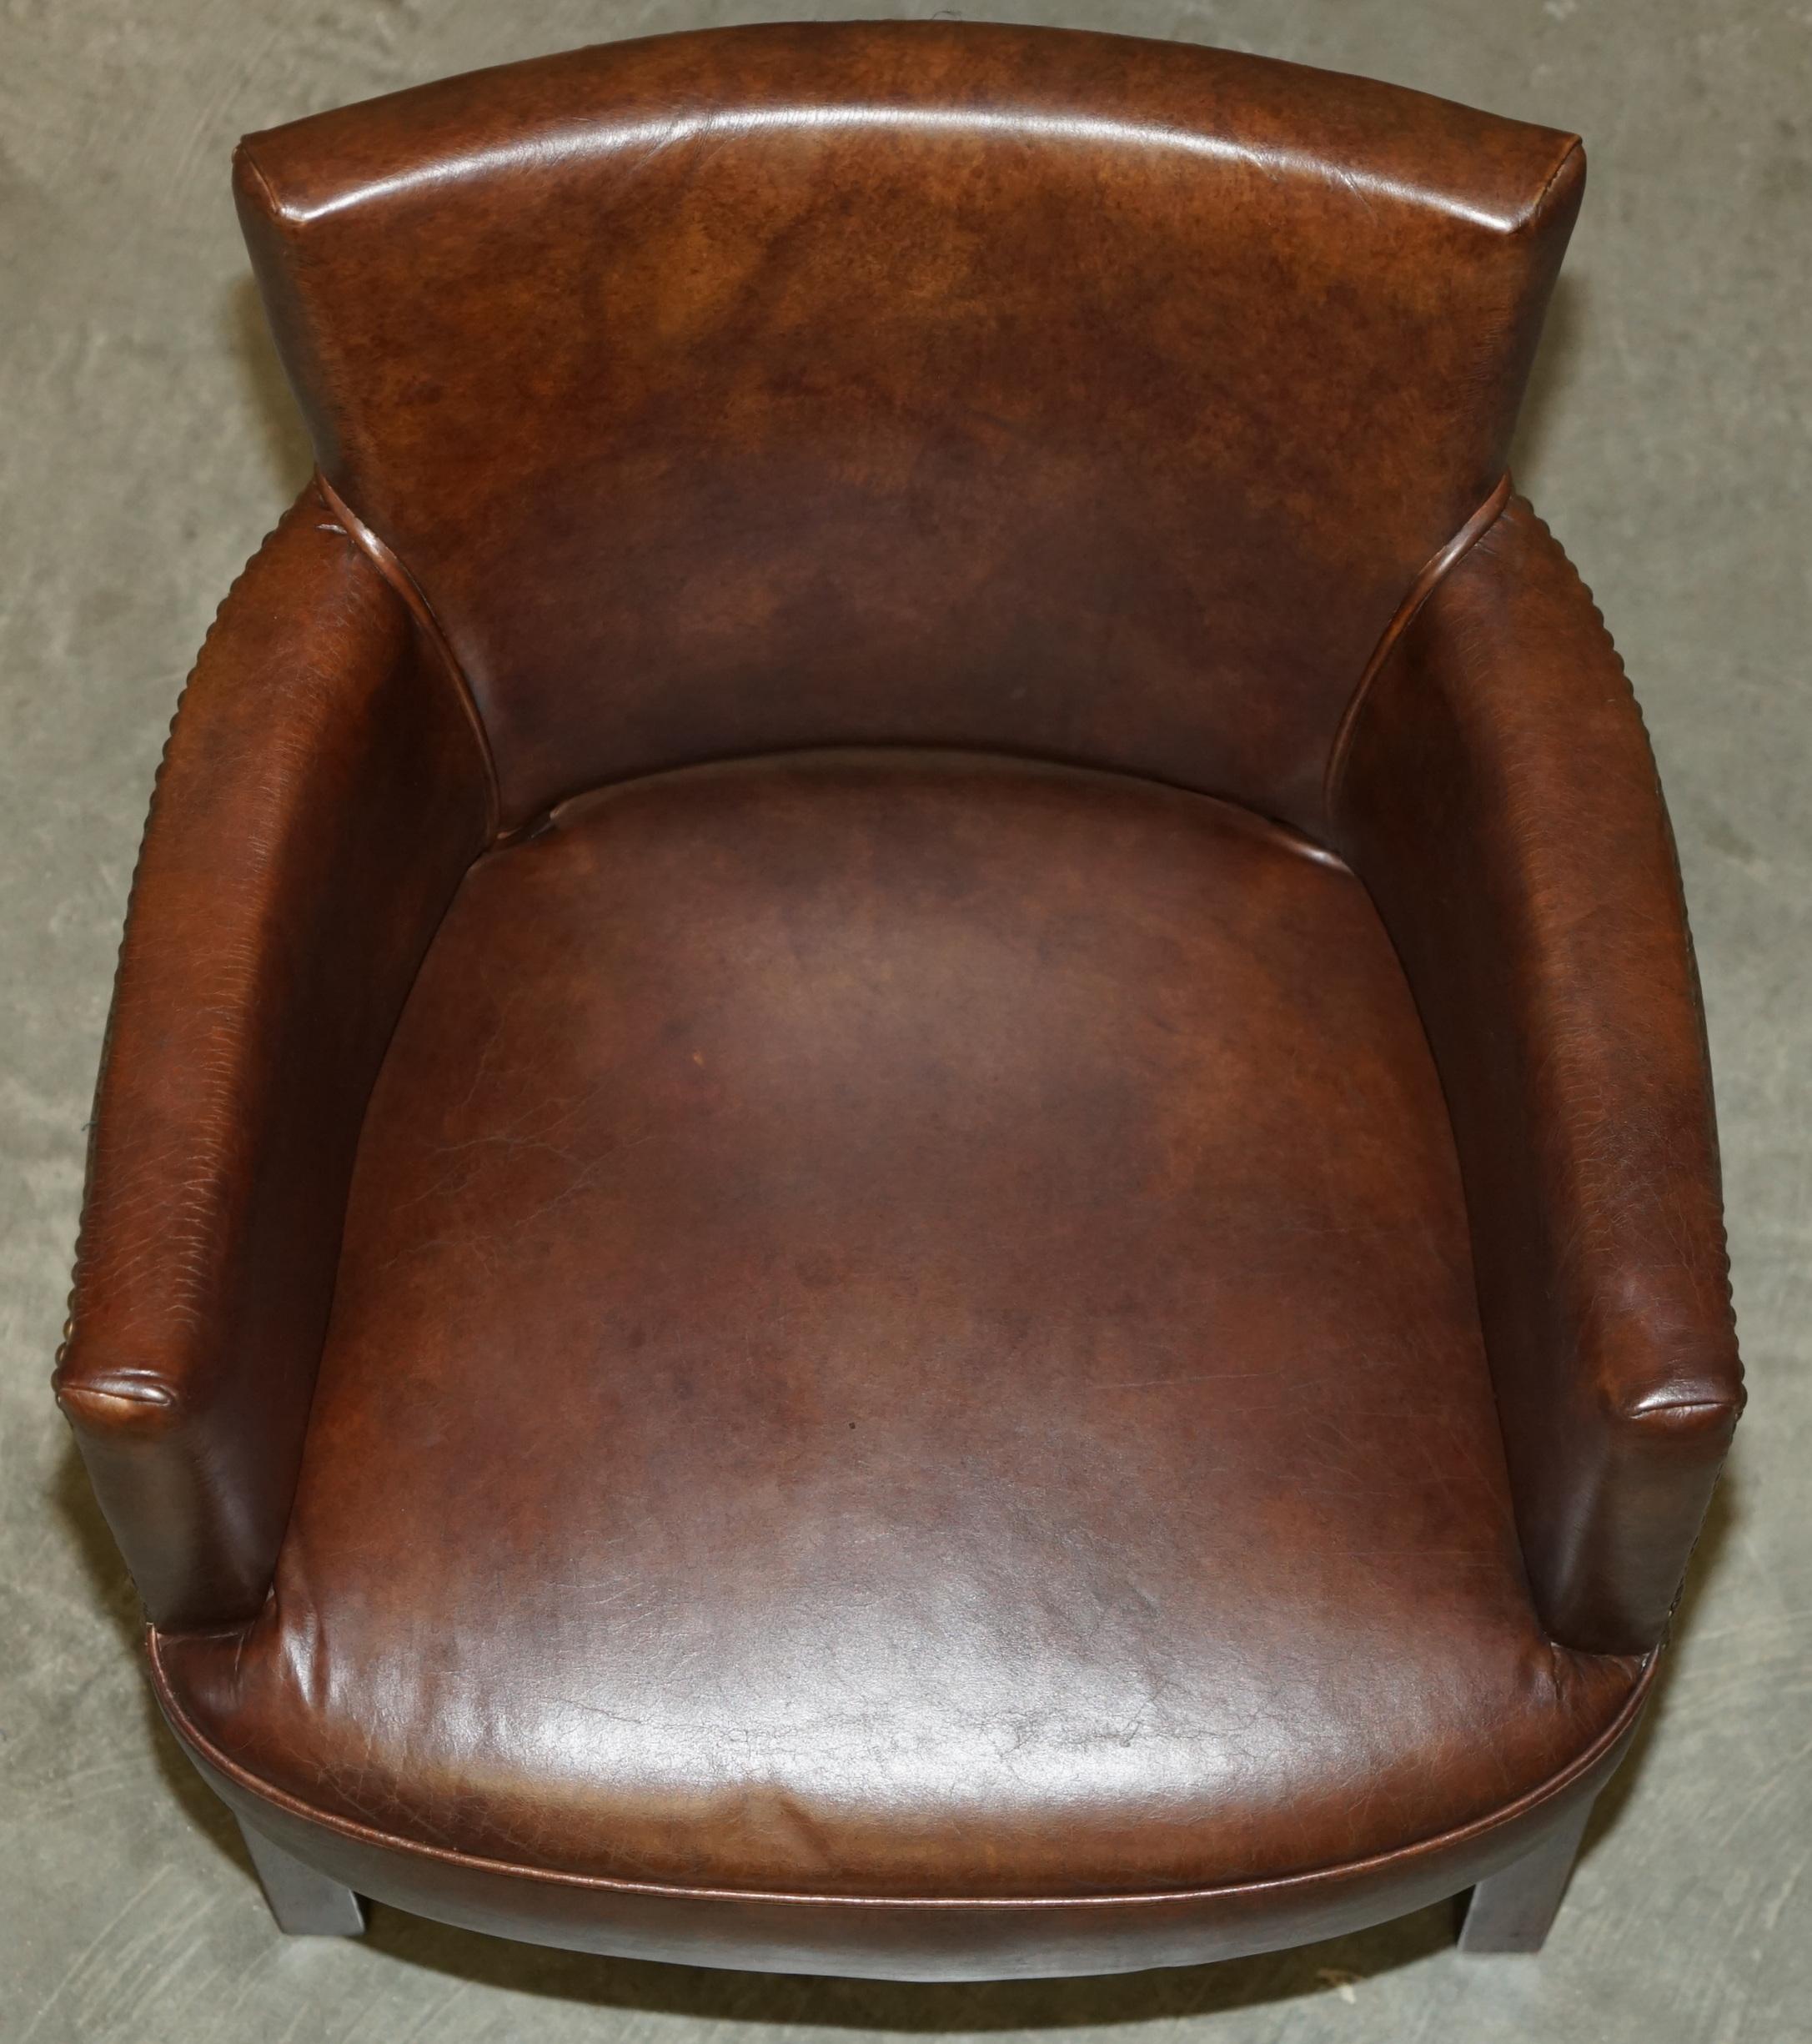 FINE PAIR OF ViNTAGE HALO HERITAGE BROWN LEATHER OCCASIONAL OR DINING CHAIRS 10